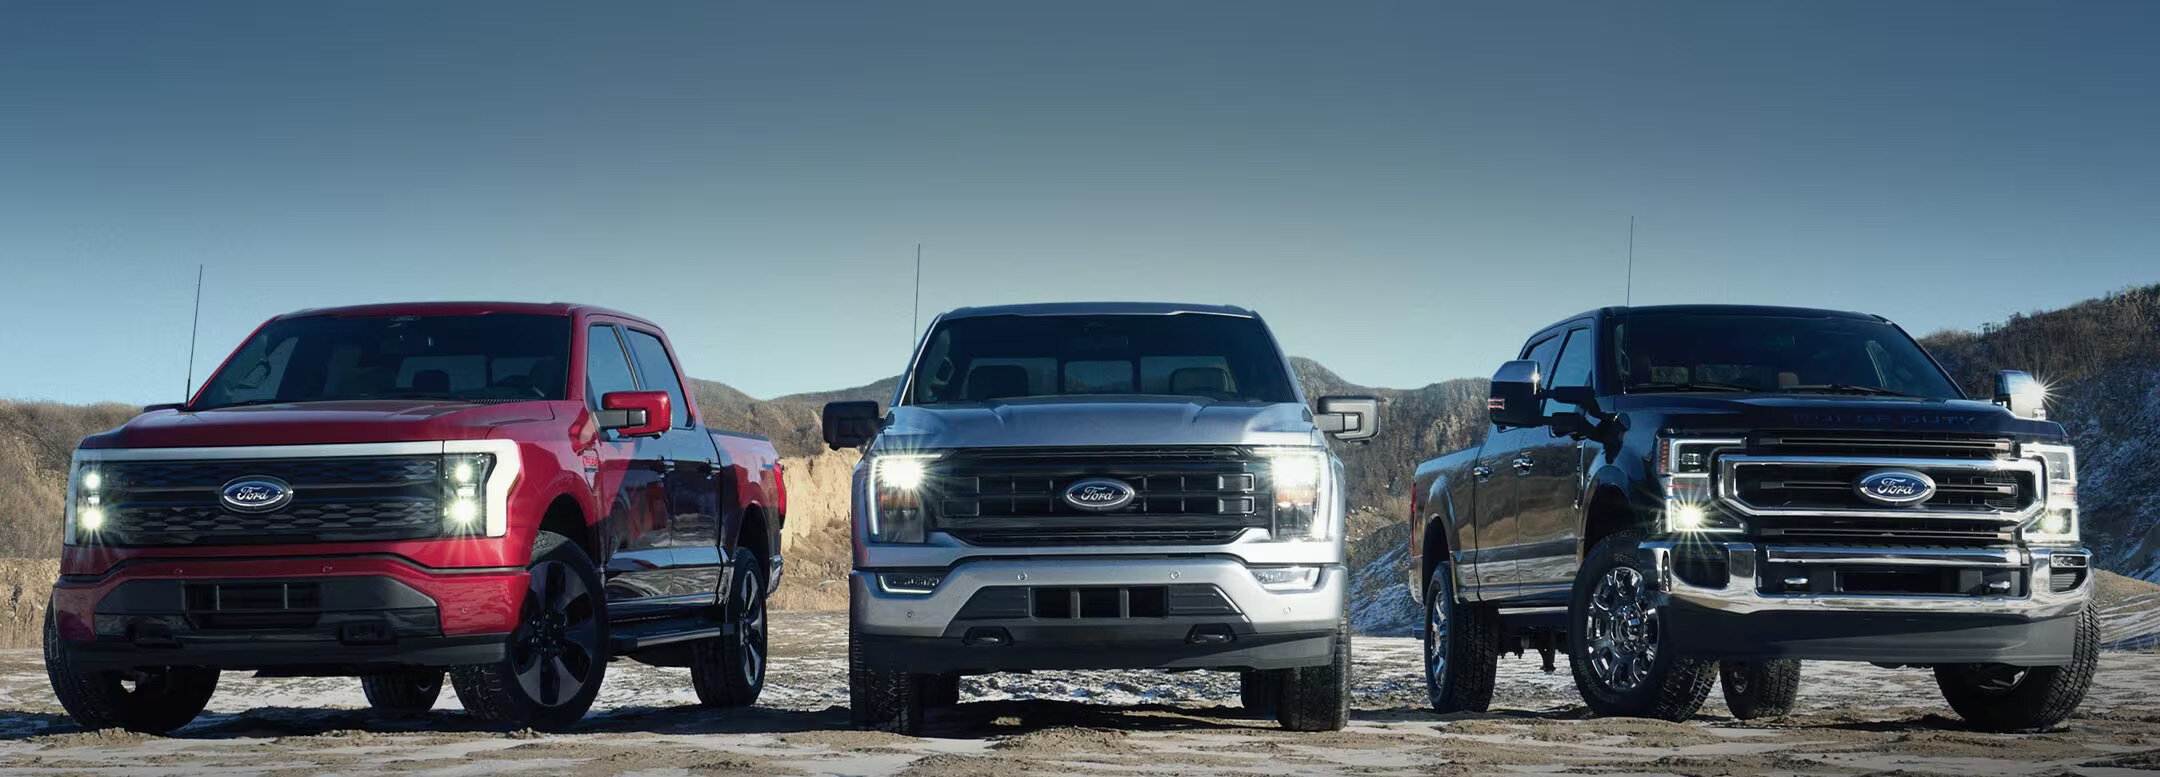 Stop by Ted Russell Ford in Knoxville, Tennessee, today to check out our amazing selection of Ford vehicles, including the brand-new Ford Lightning and the 2019 Ford Bronco. Whether you're hoping to buy a new or used Ford truck, we can help you get exactly what you need.